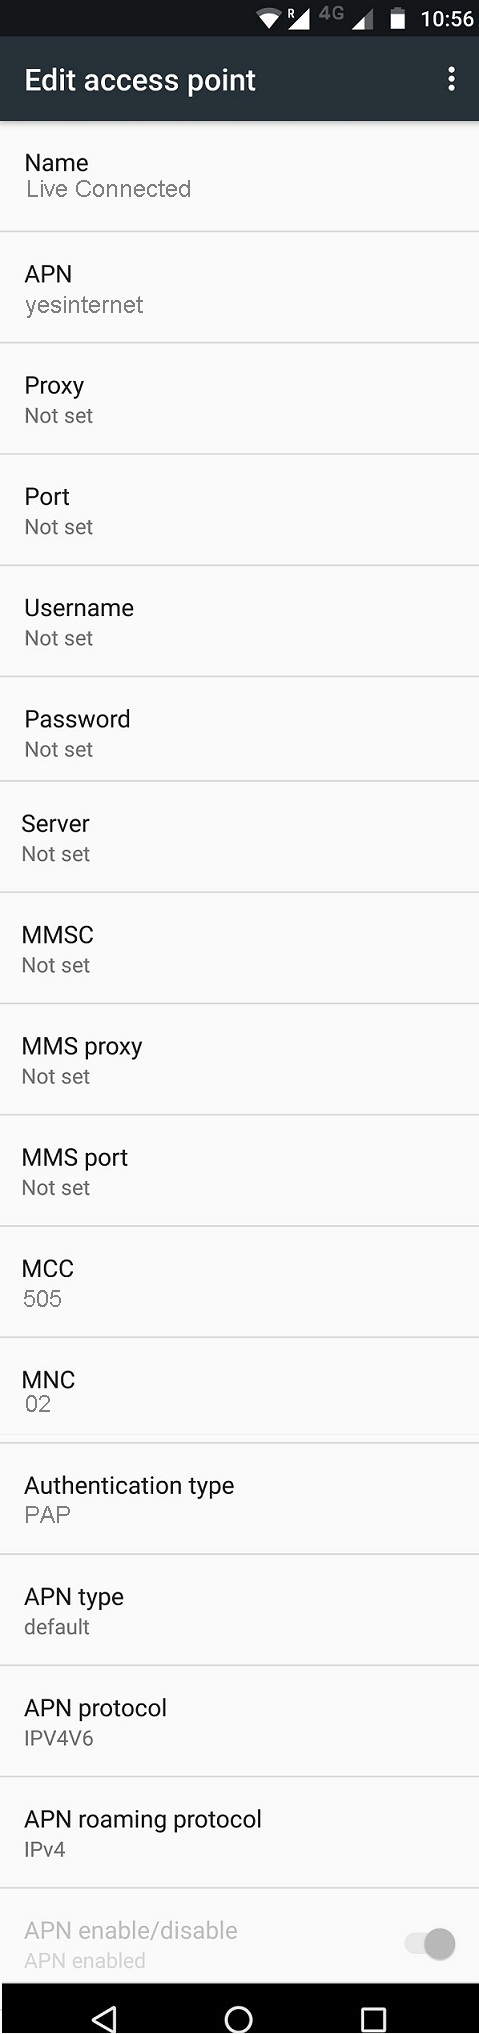 Live Connected APN Settings